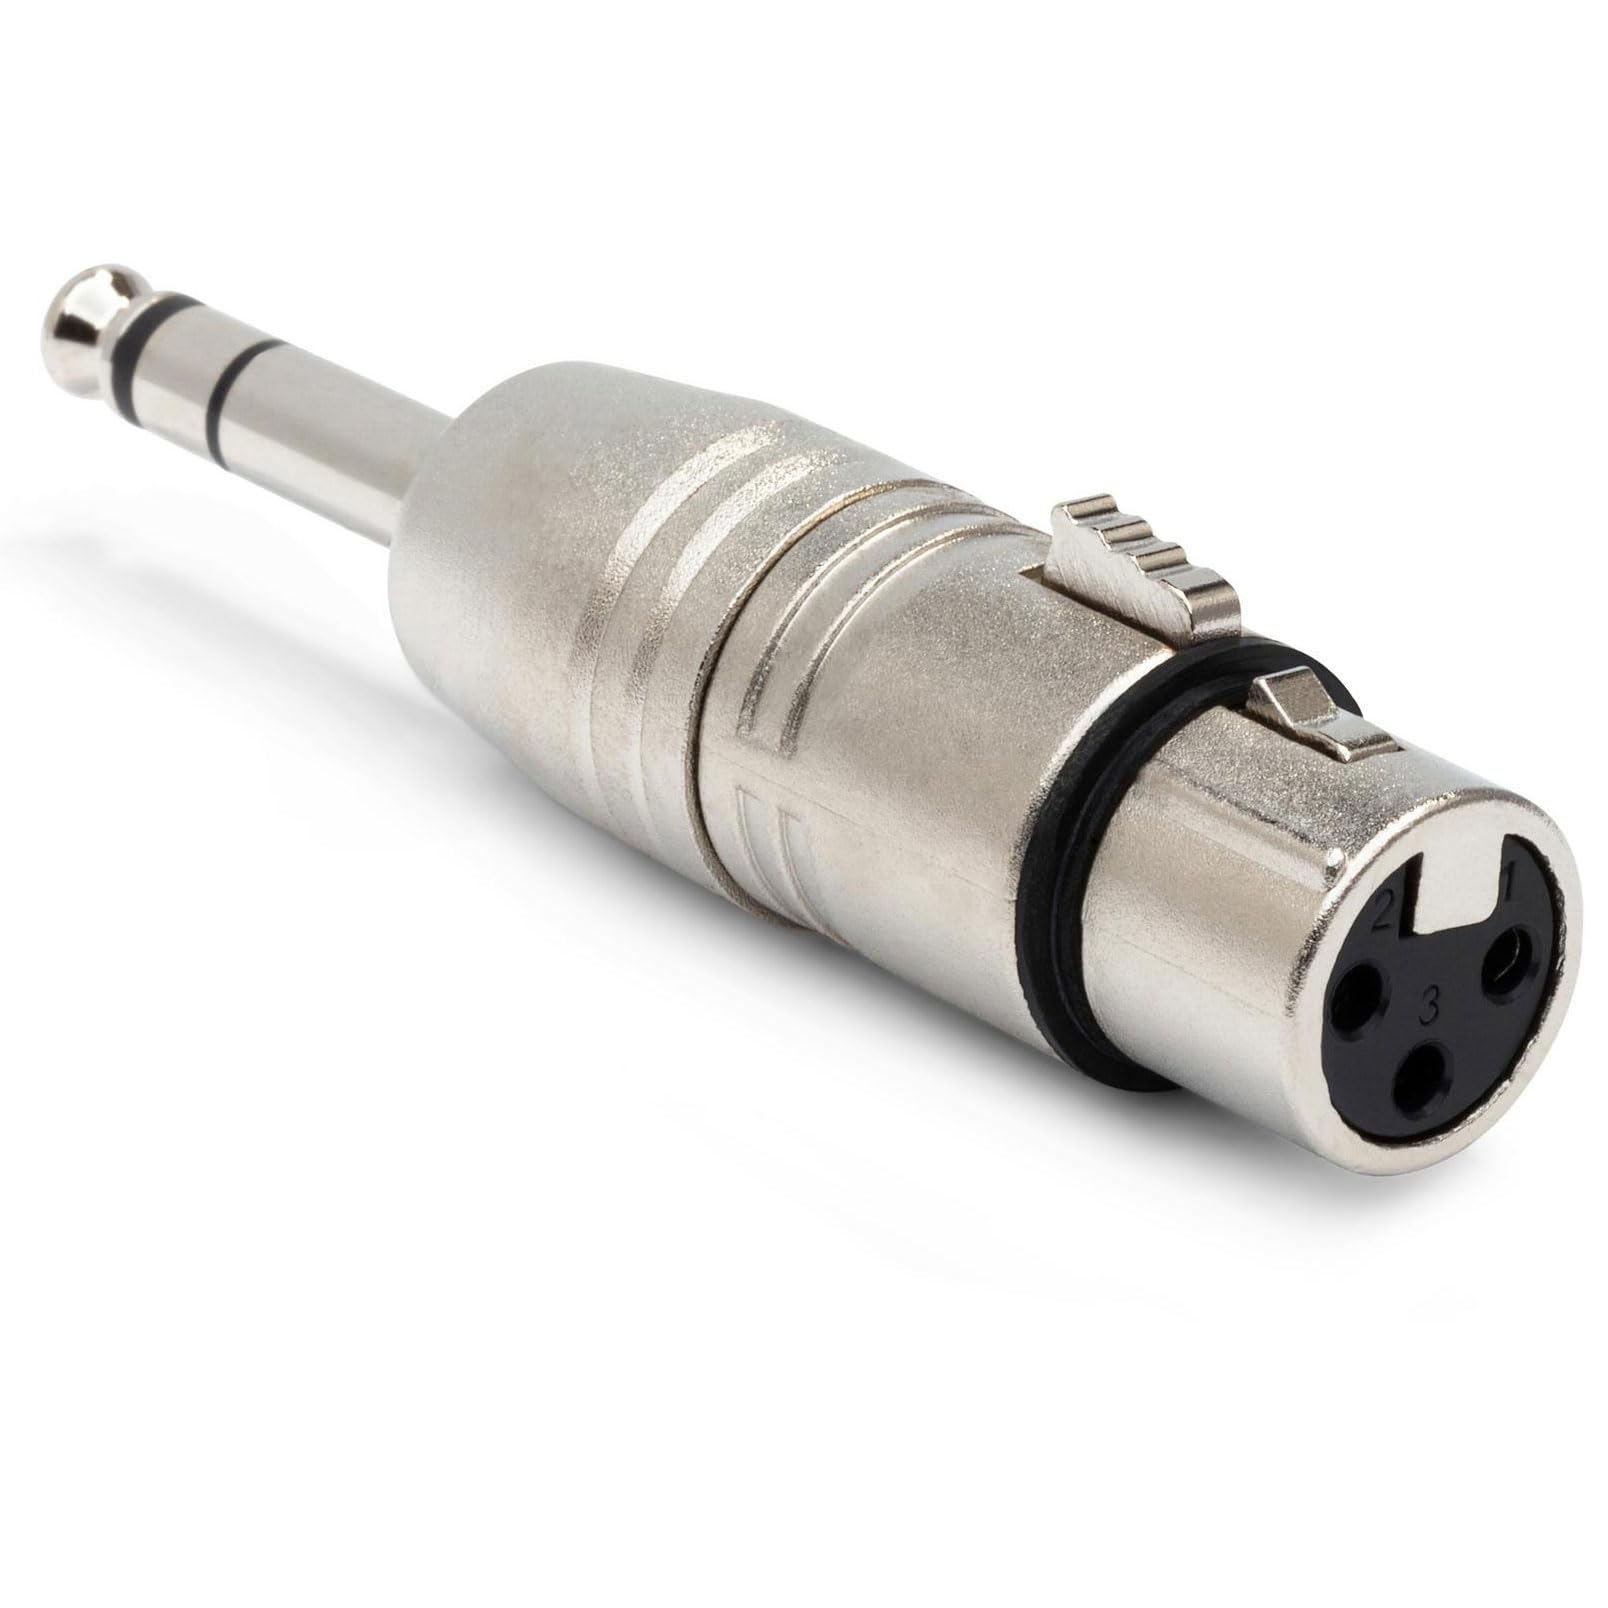 Hosa GXP-143 XLR3F to 1/4 in TRS Adaptor, Designed to Adapt an XLR3M to a Balanced Phone Input